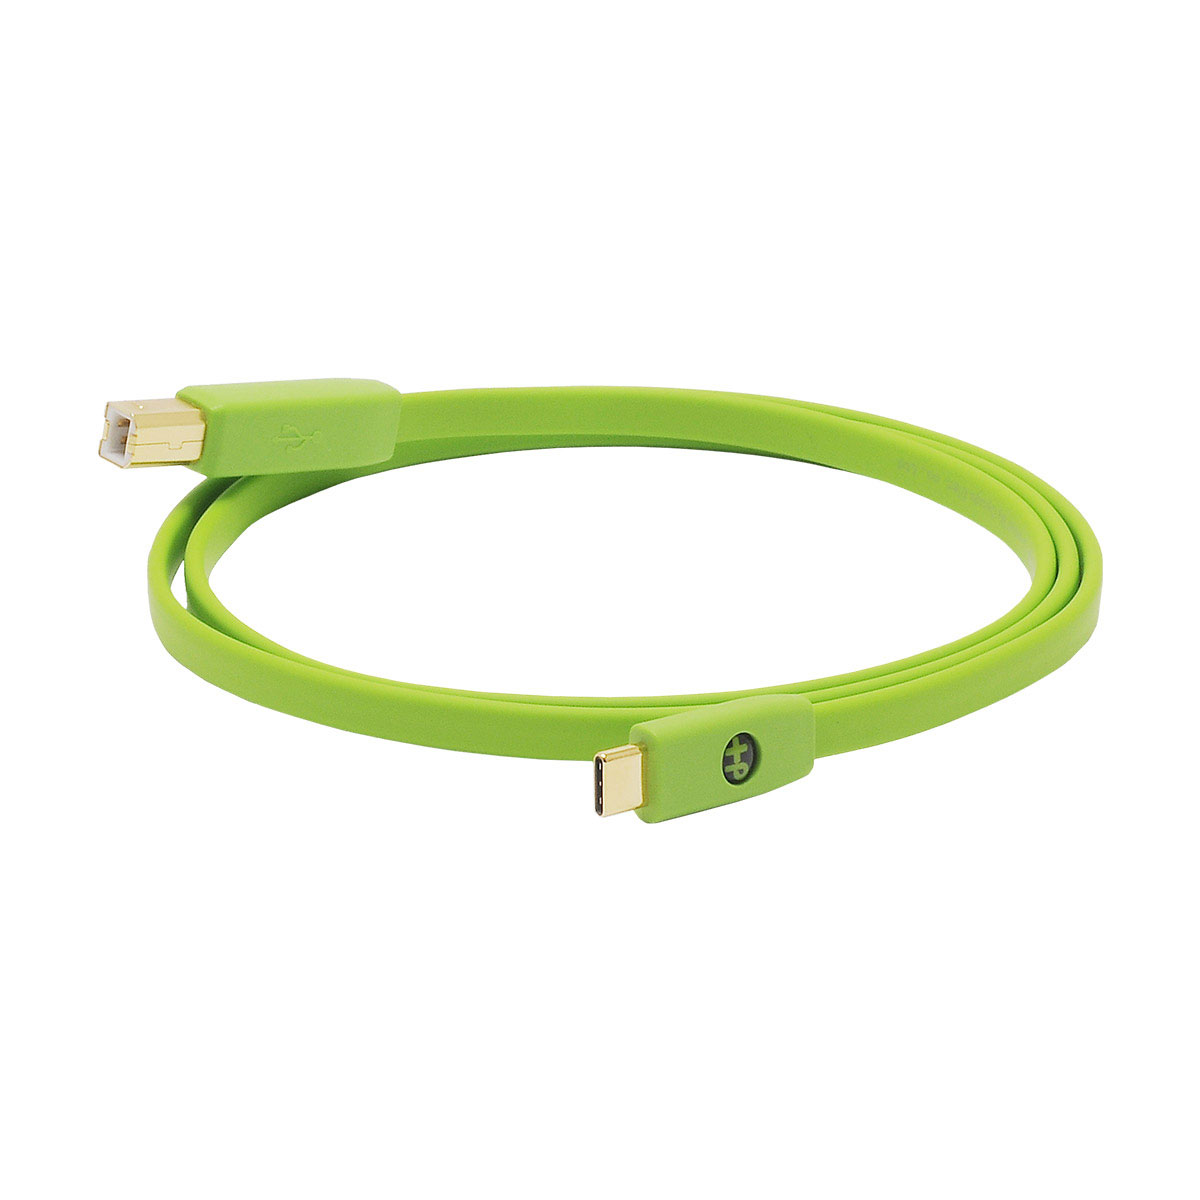 NEO BY OYAIDE CLASS B USB TYPE-C 1M